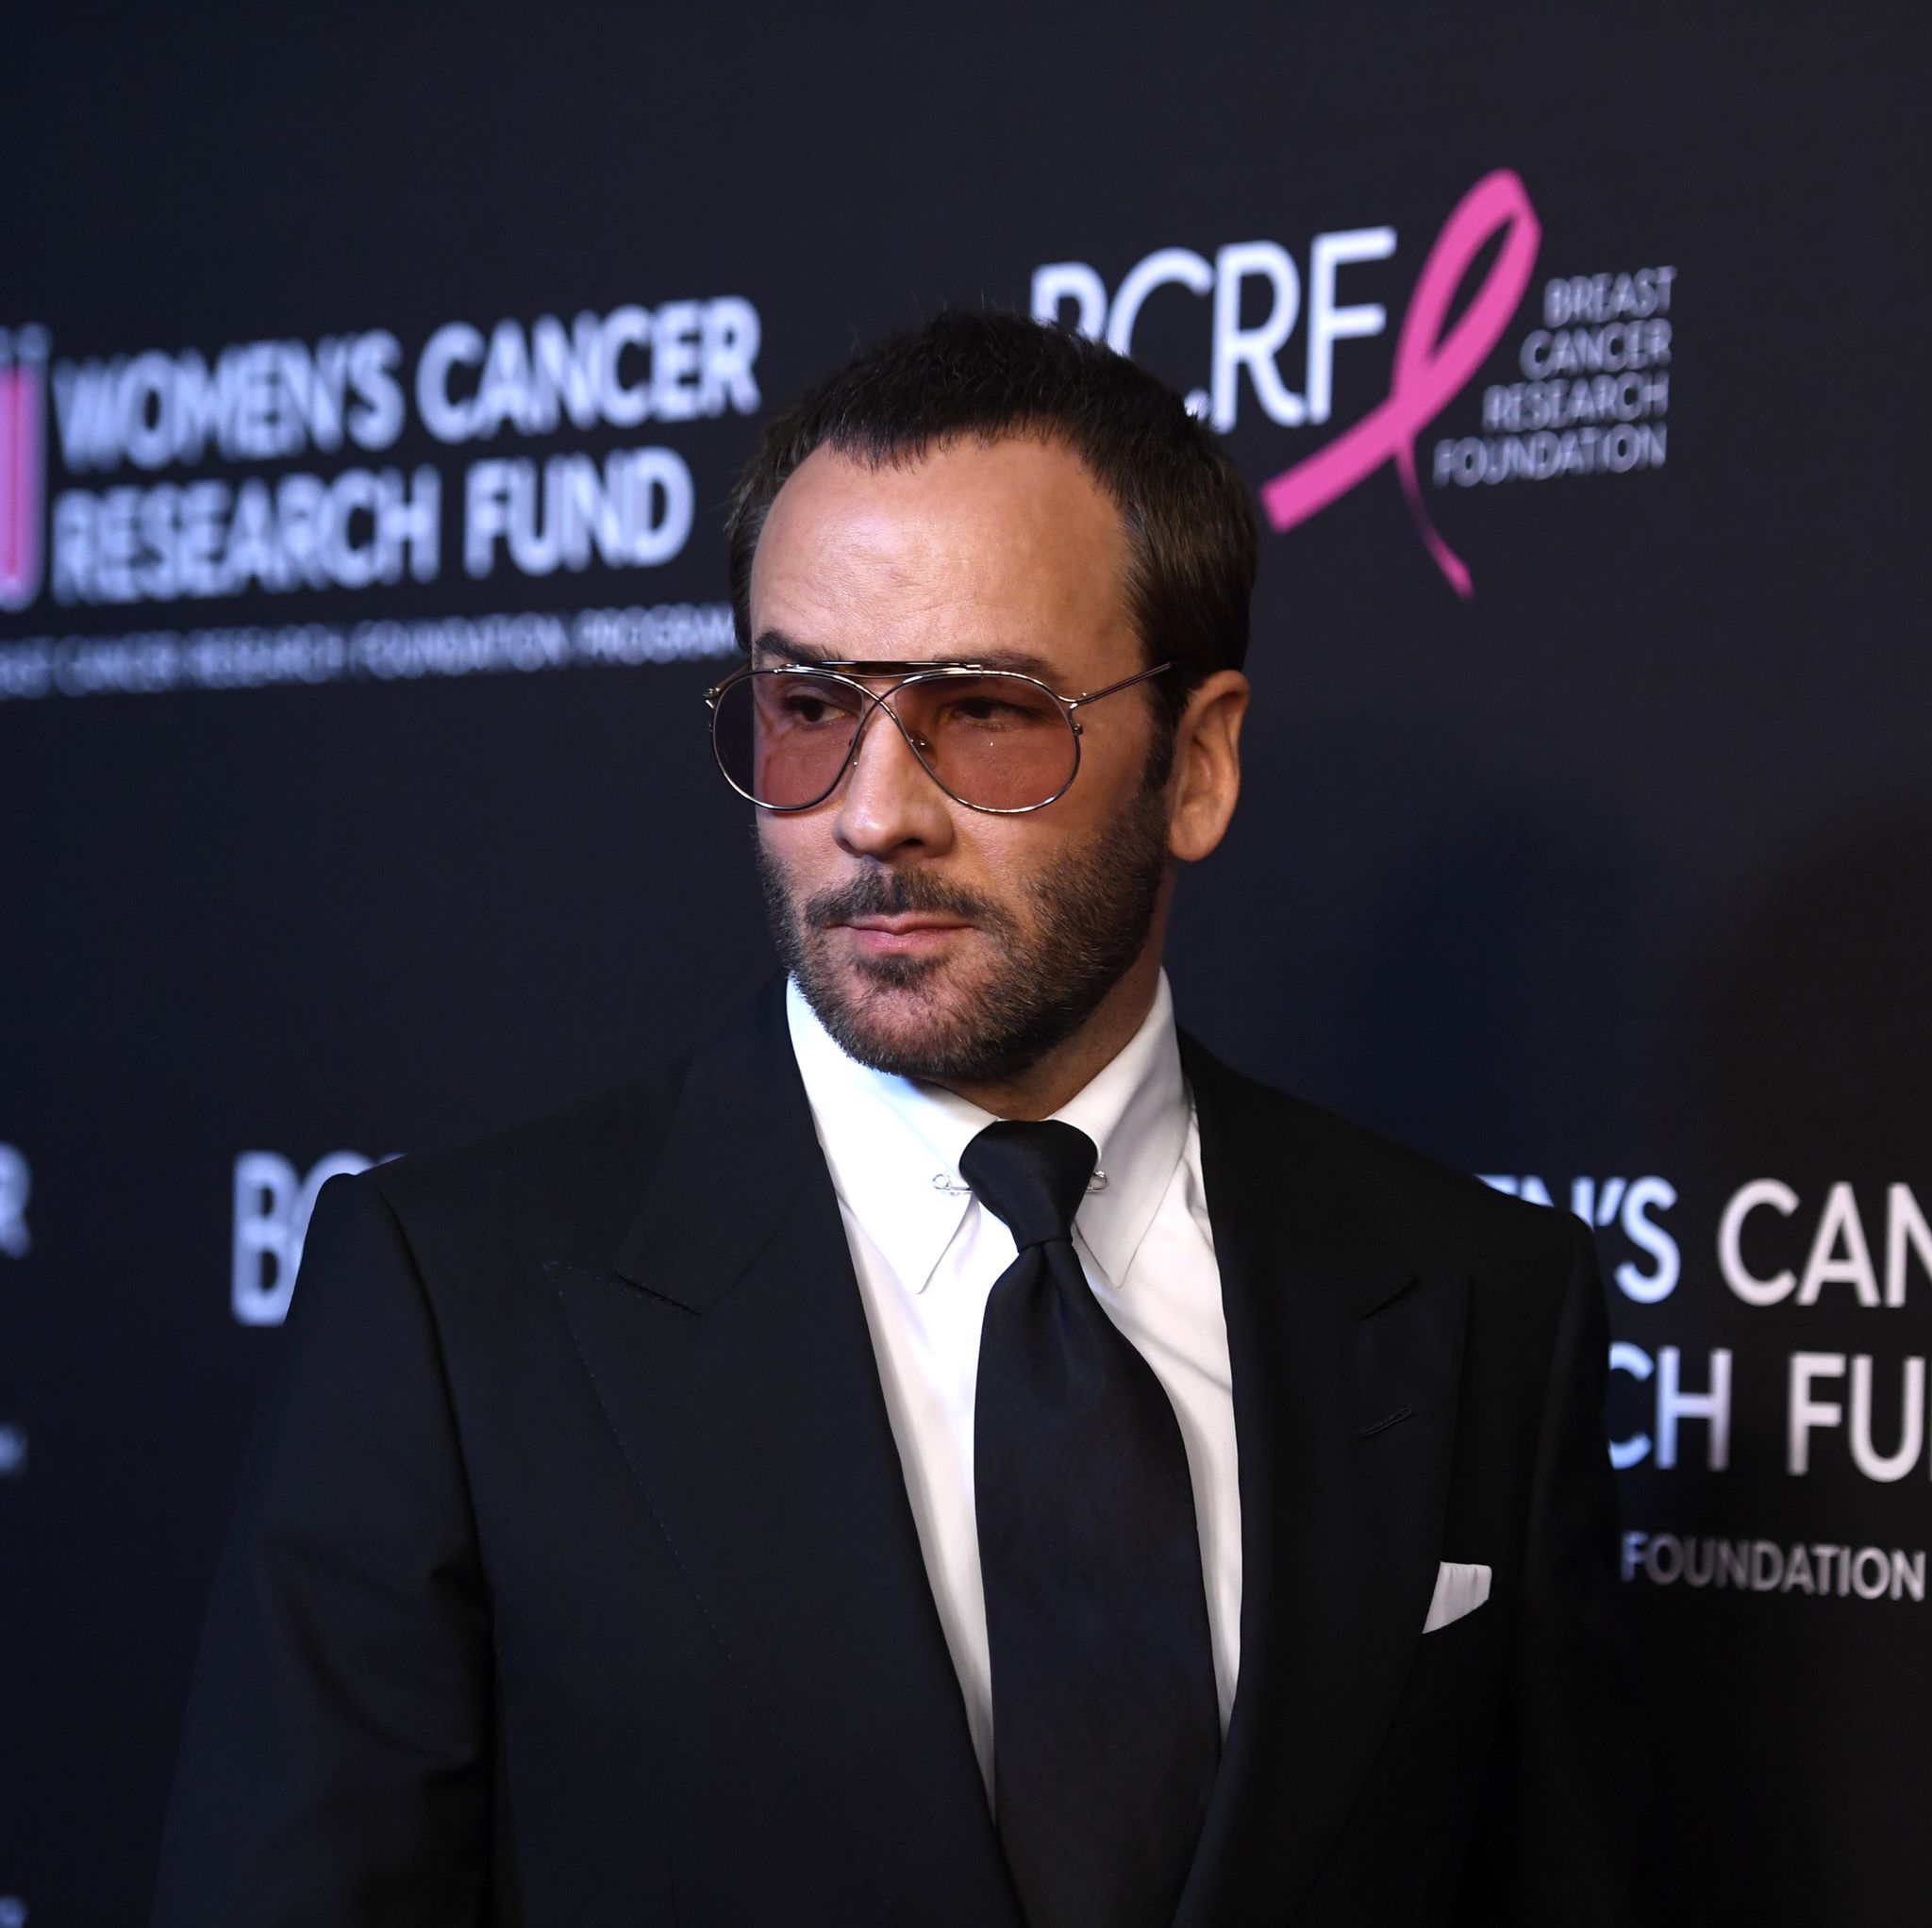 Tom Ford on Fashion Design, Luxury Brands and Influence